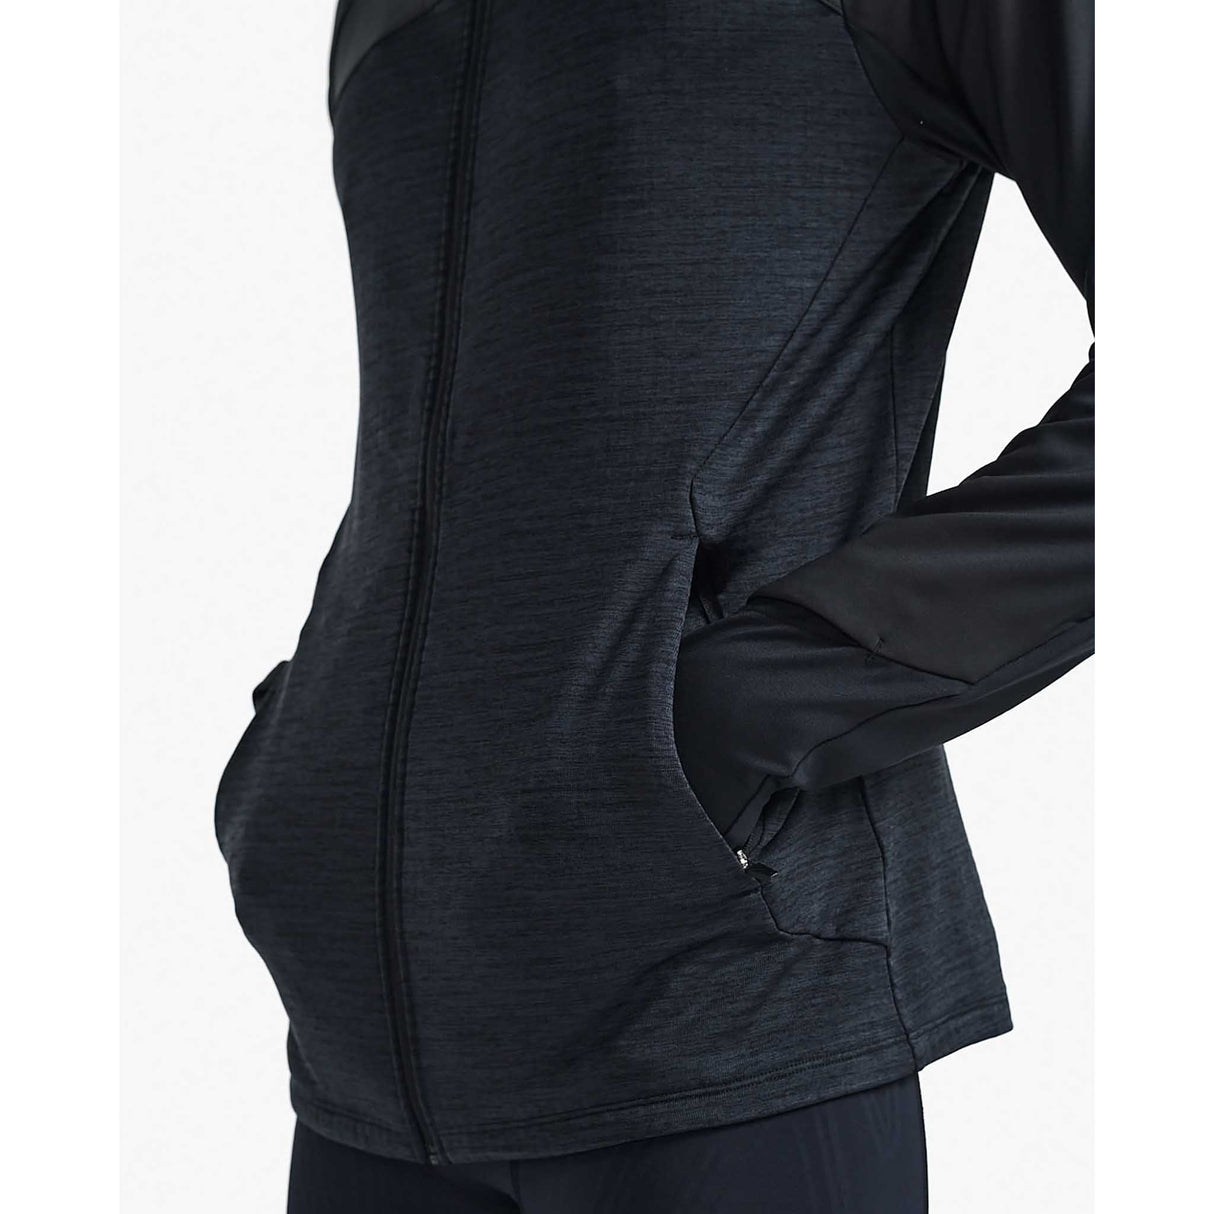 2XU Ignition Shield Hooded Mid Layer chandail homme noir / noir réfléchissant poches